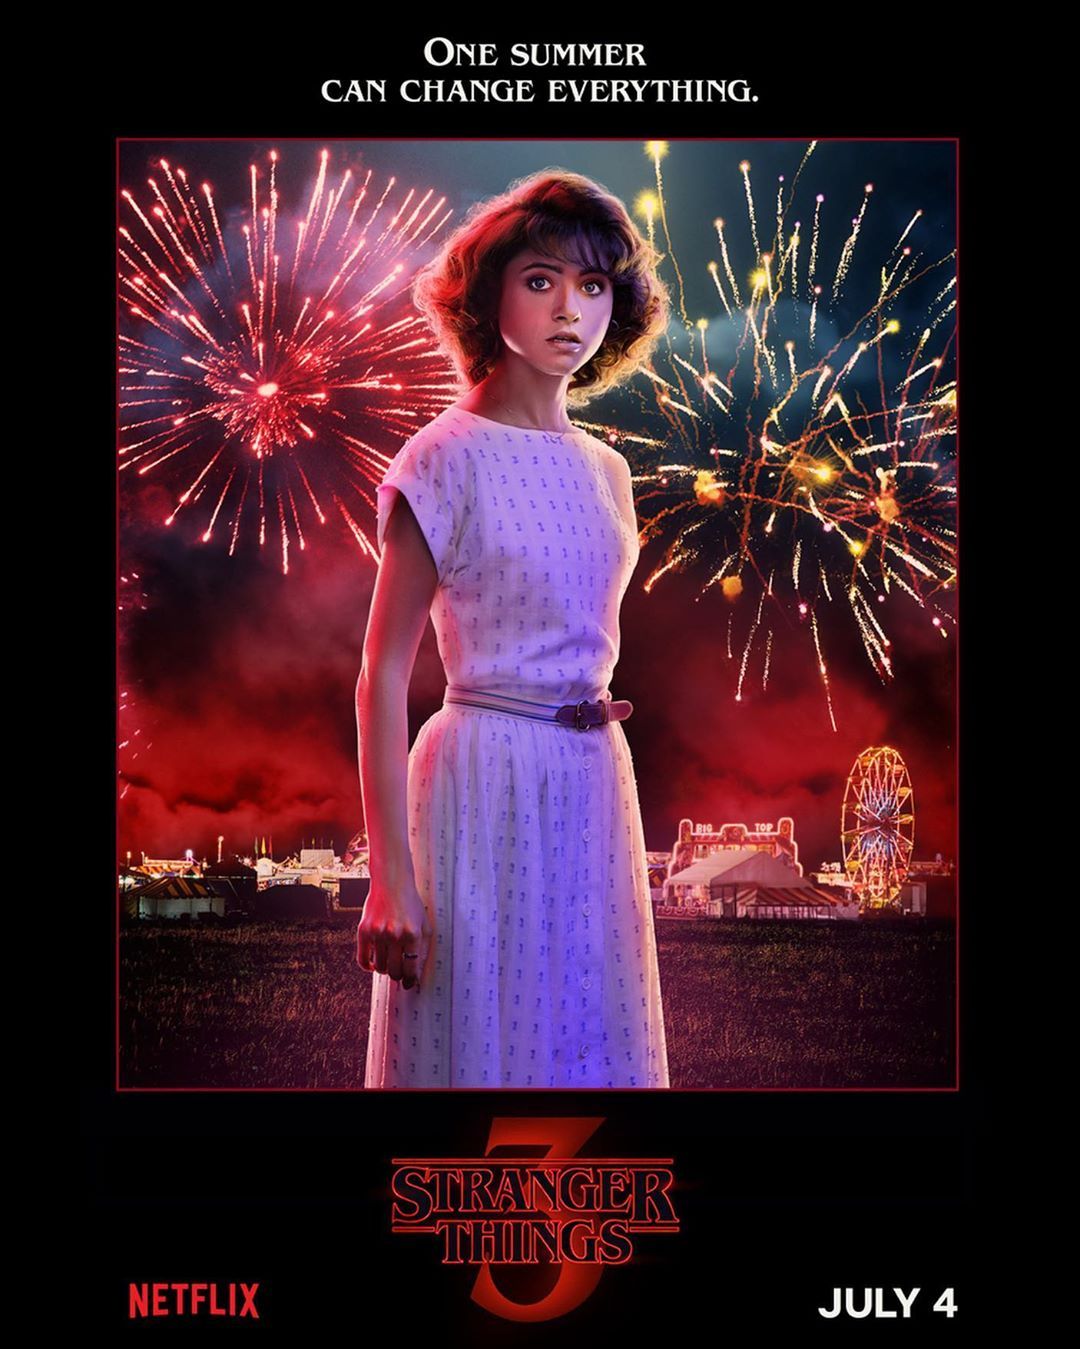 Stranger Things Season 3 Character Posters Bring the Fireworks